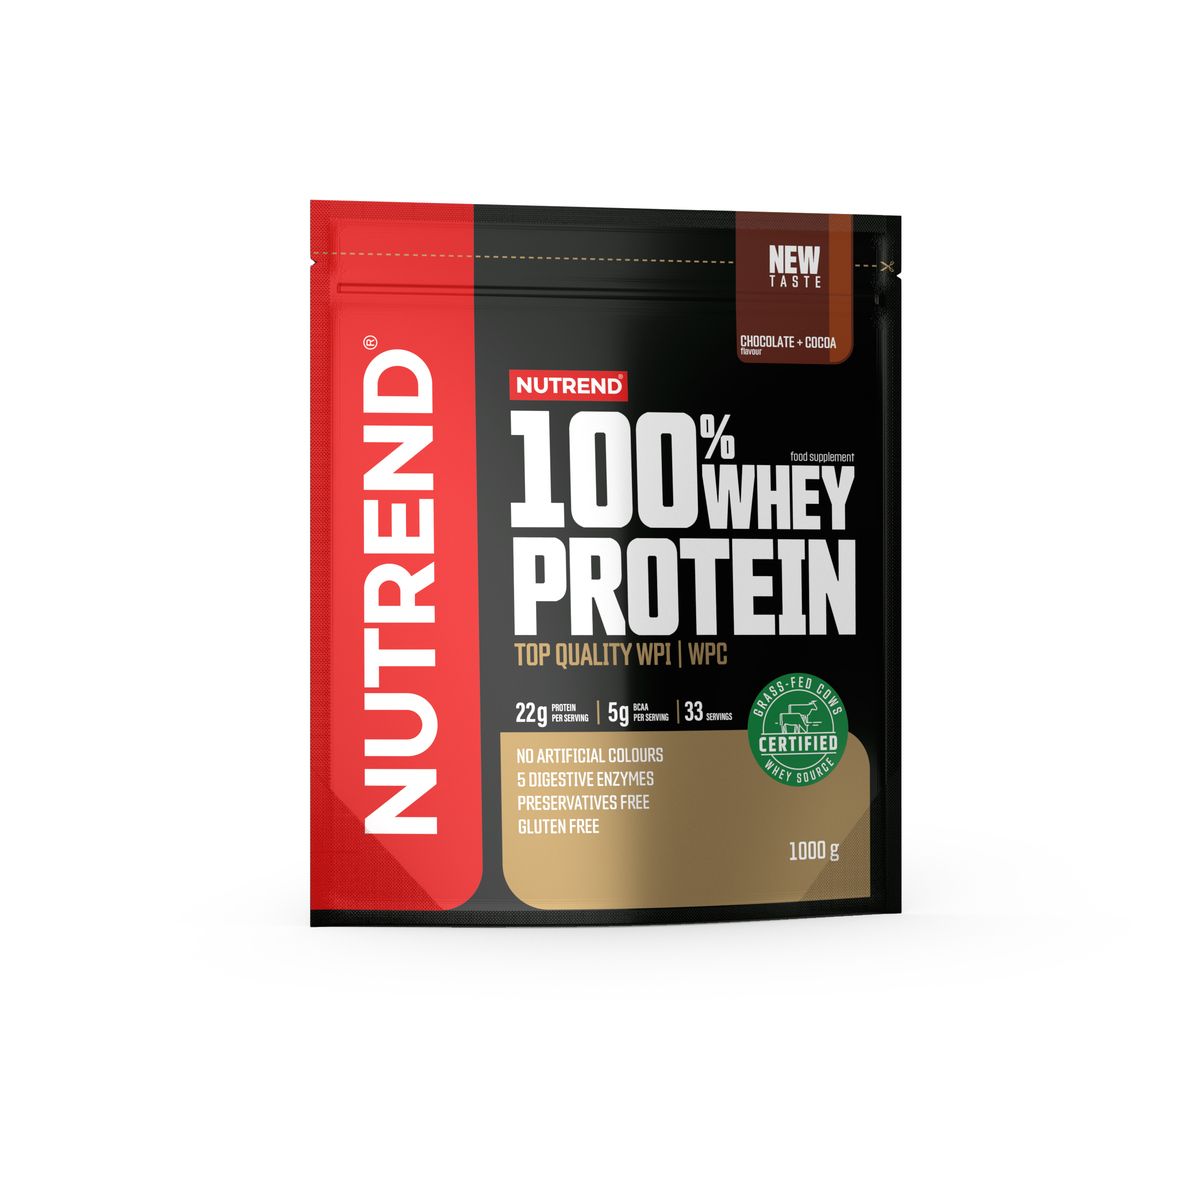 Concentrate Proteice - NUTREND 100% WHEY PROTEIN 1Kg Vanilie, advancednutrition.ro